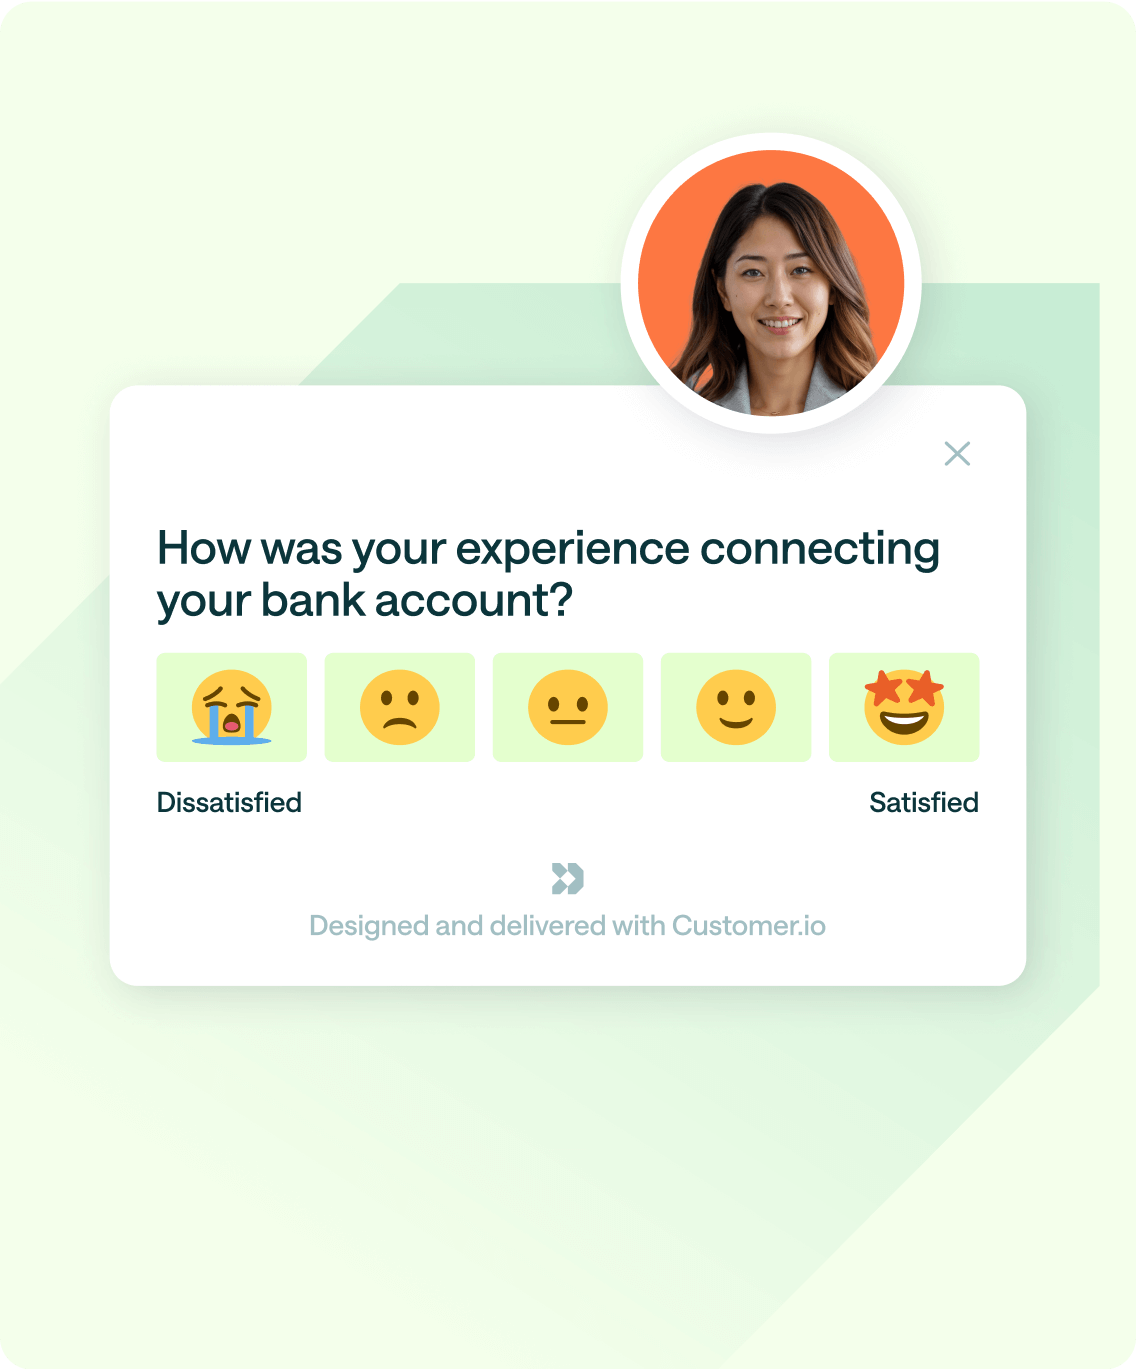 Improve customer satisfaction by seamlessly connecting with your customers across all your messaging channels.